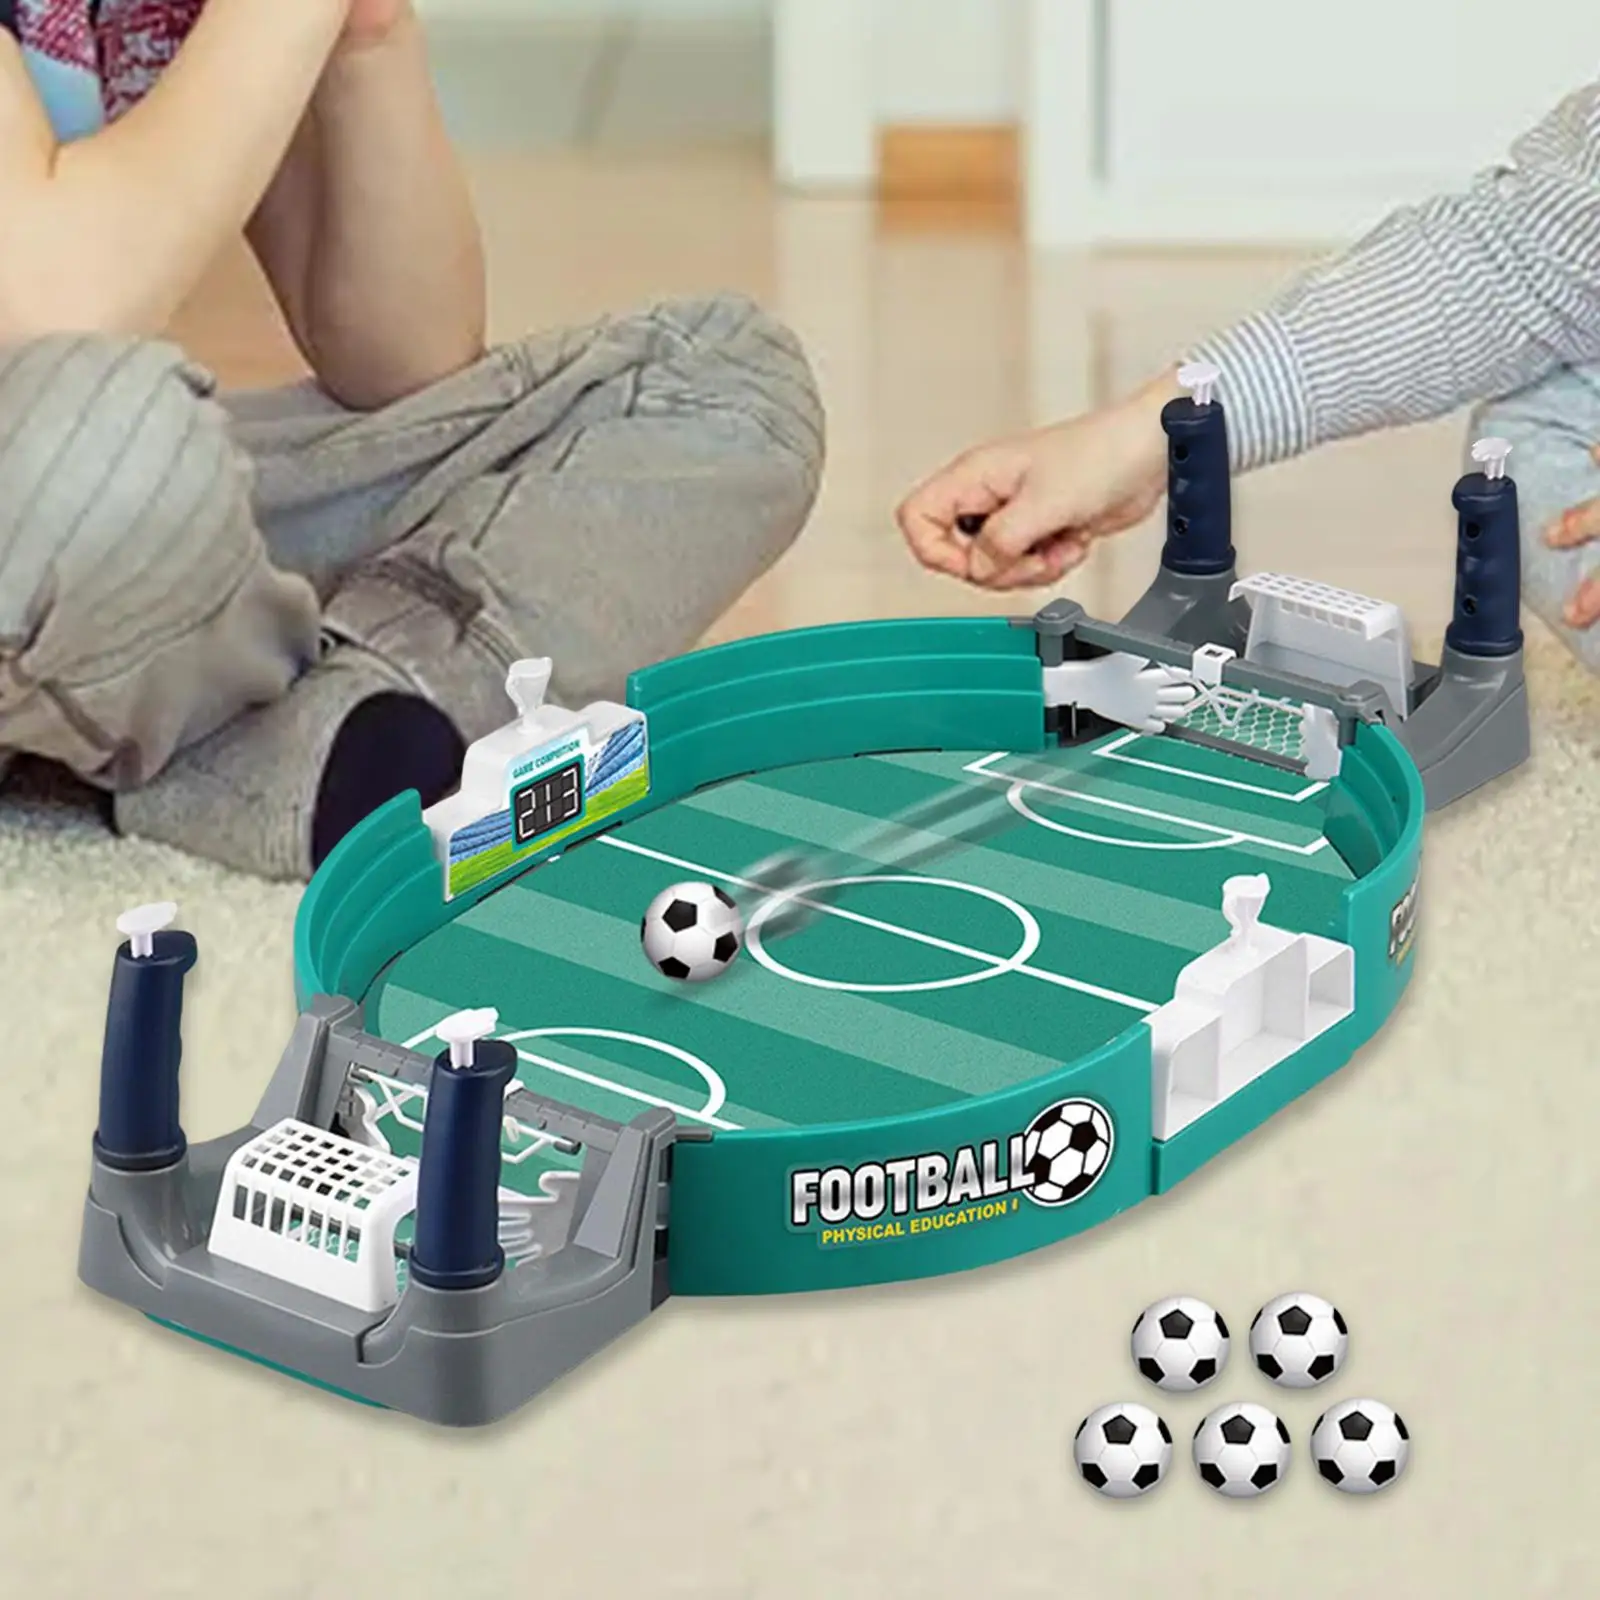 Tabletop Football Pinball Games Arcade Style Indoor Sport with Finger Battle